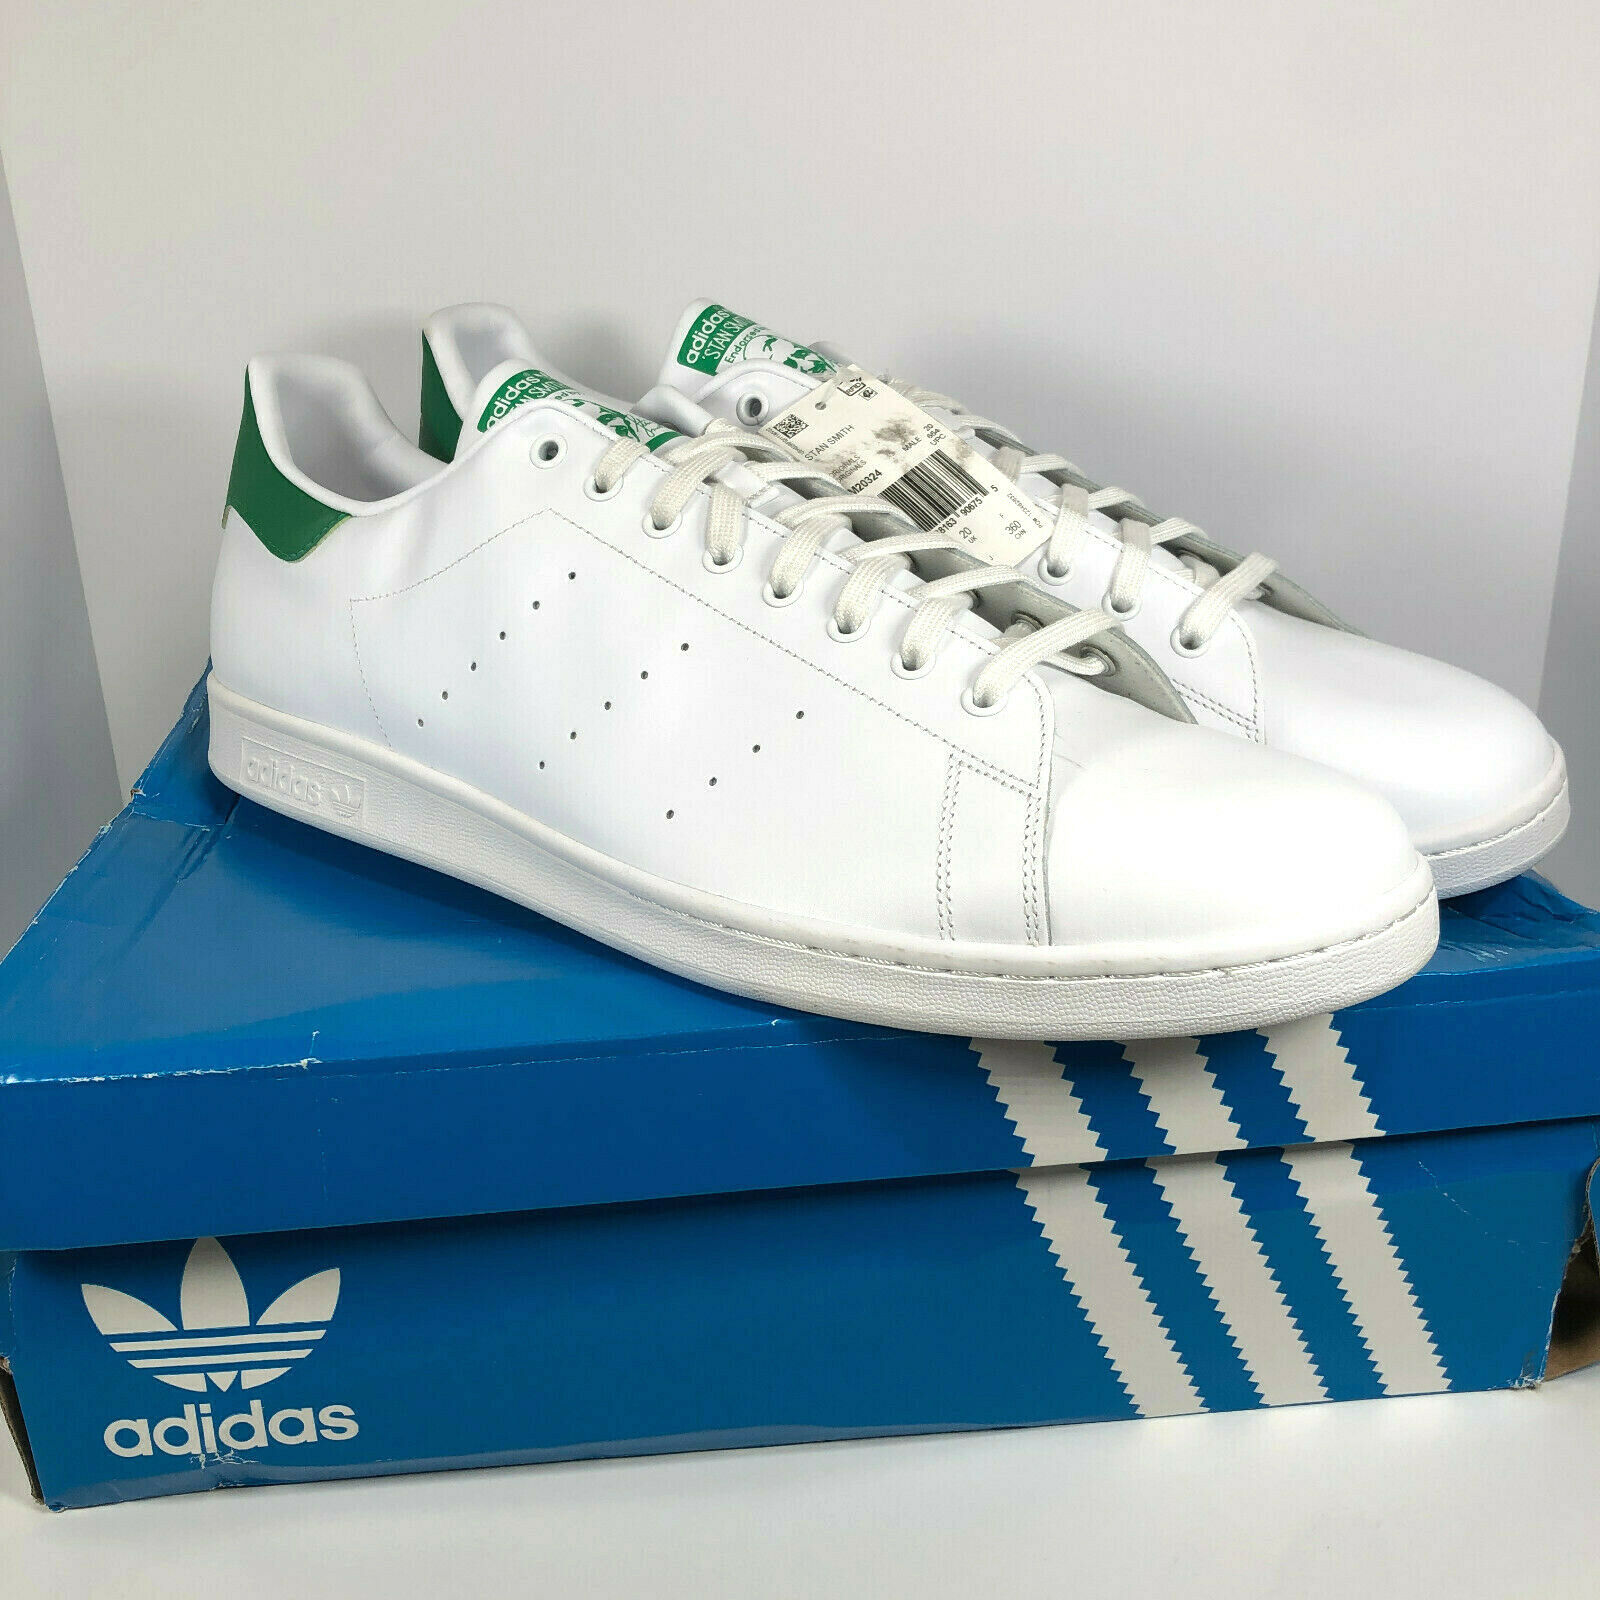 Adidas Men's Stan Smith Tennis Shoes Sneakers White/Green Size 21 New Originals